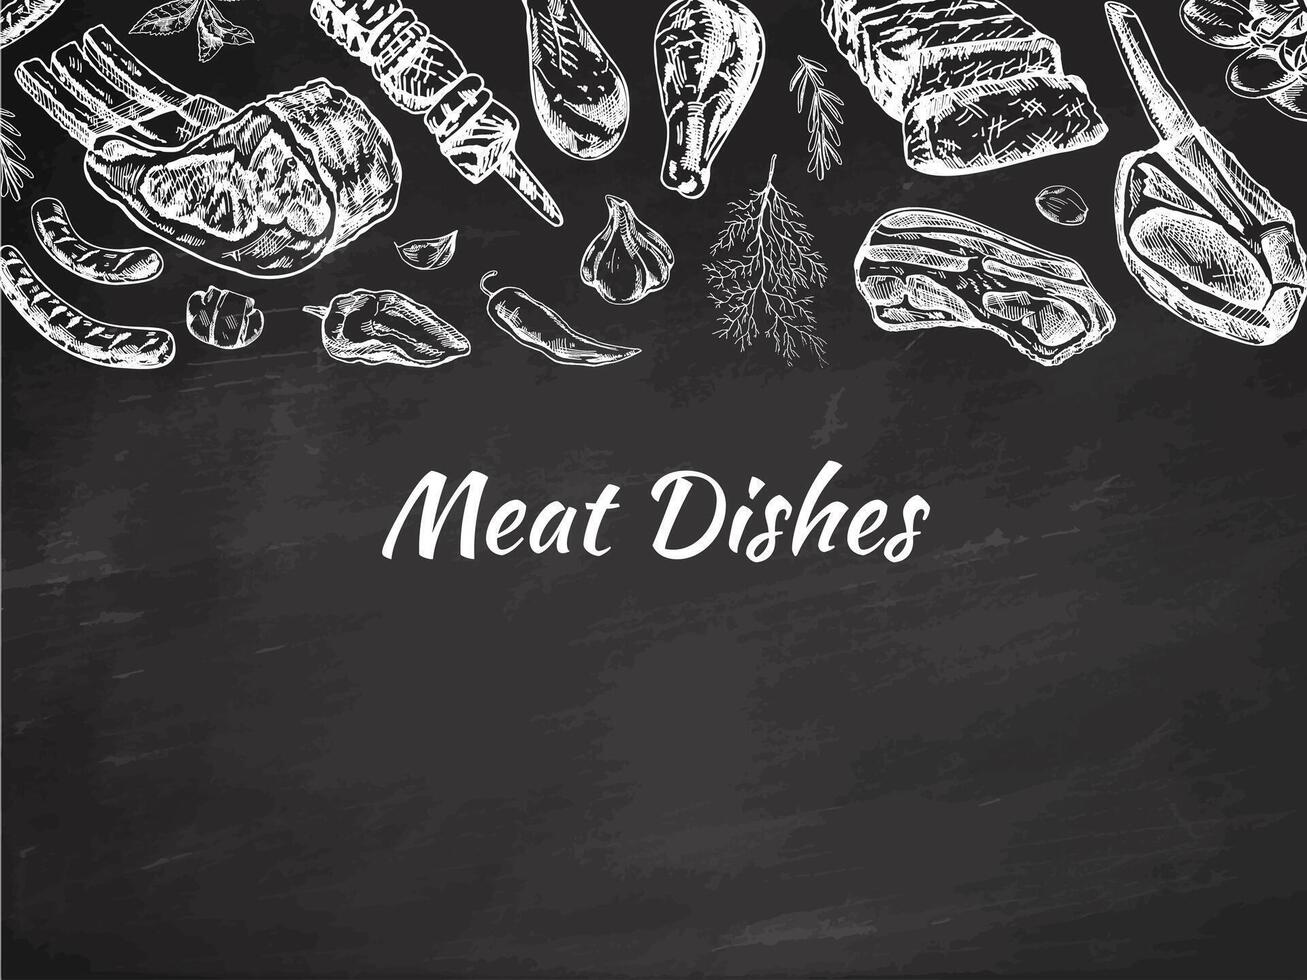 Meat and vegetables menu template in engraved vintage style. Hand-drawn sketches of barbecue meat pieces with herbs and seasonings on chalkboard background. vector